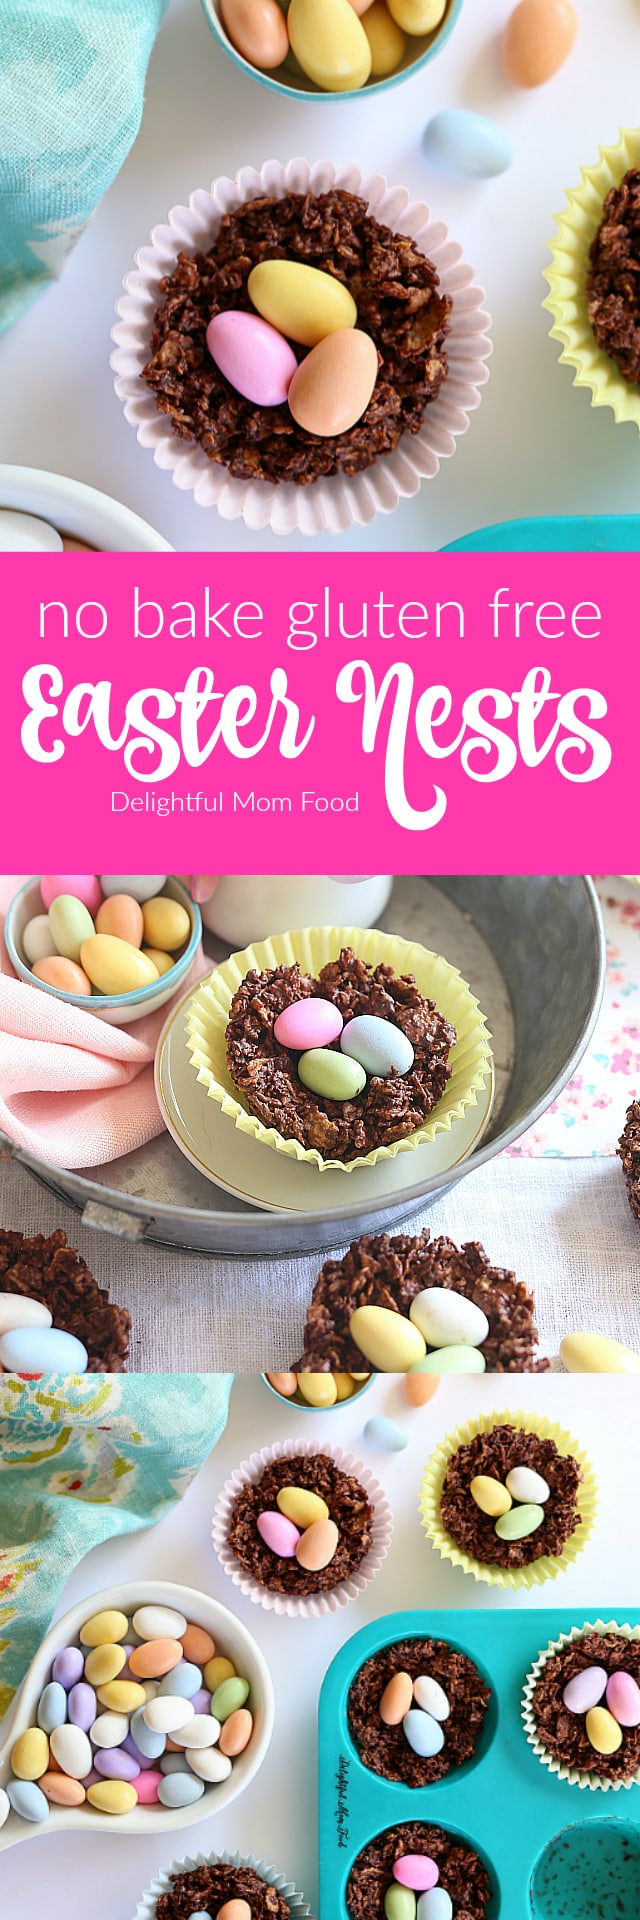 Chocolate Easter Nest Treats! Gluten Free Dairy Free Nut Free No Baking Required! | Delightful Mom Food